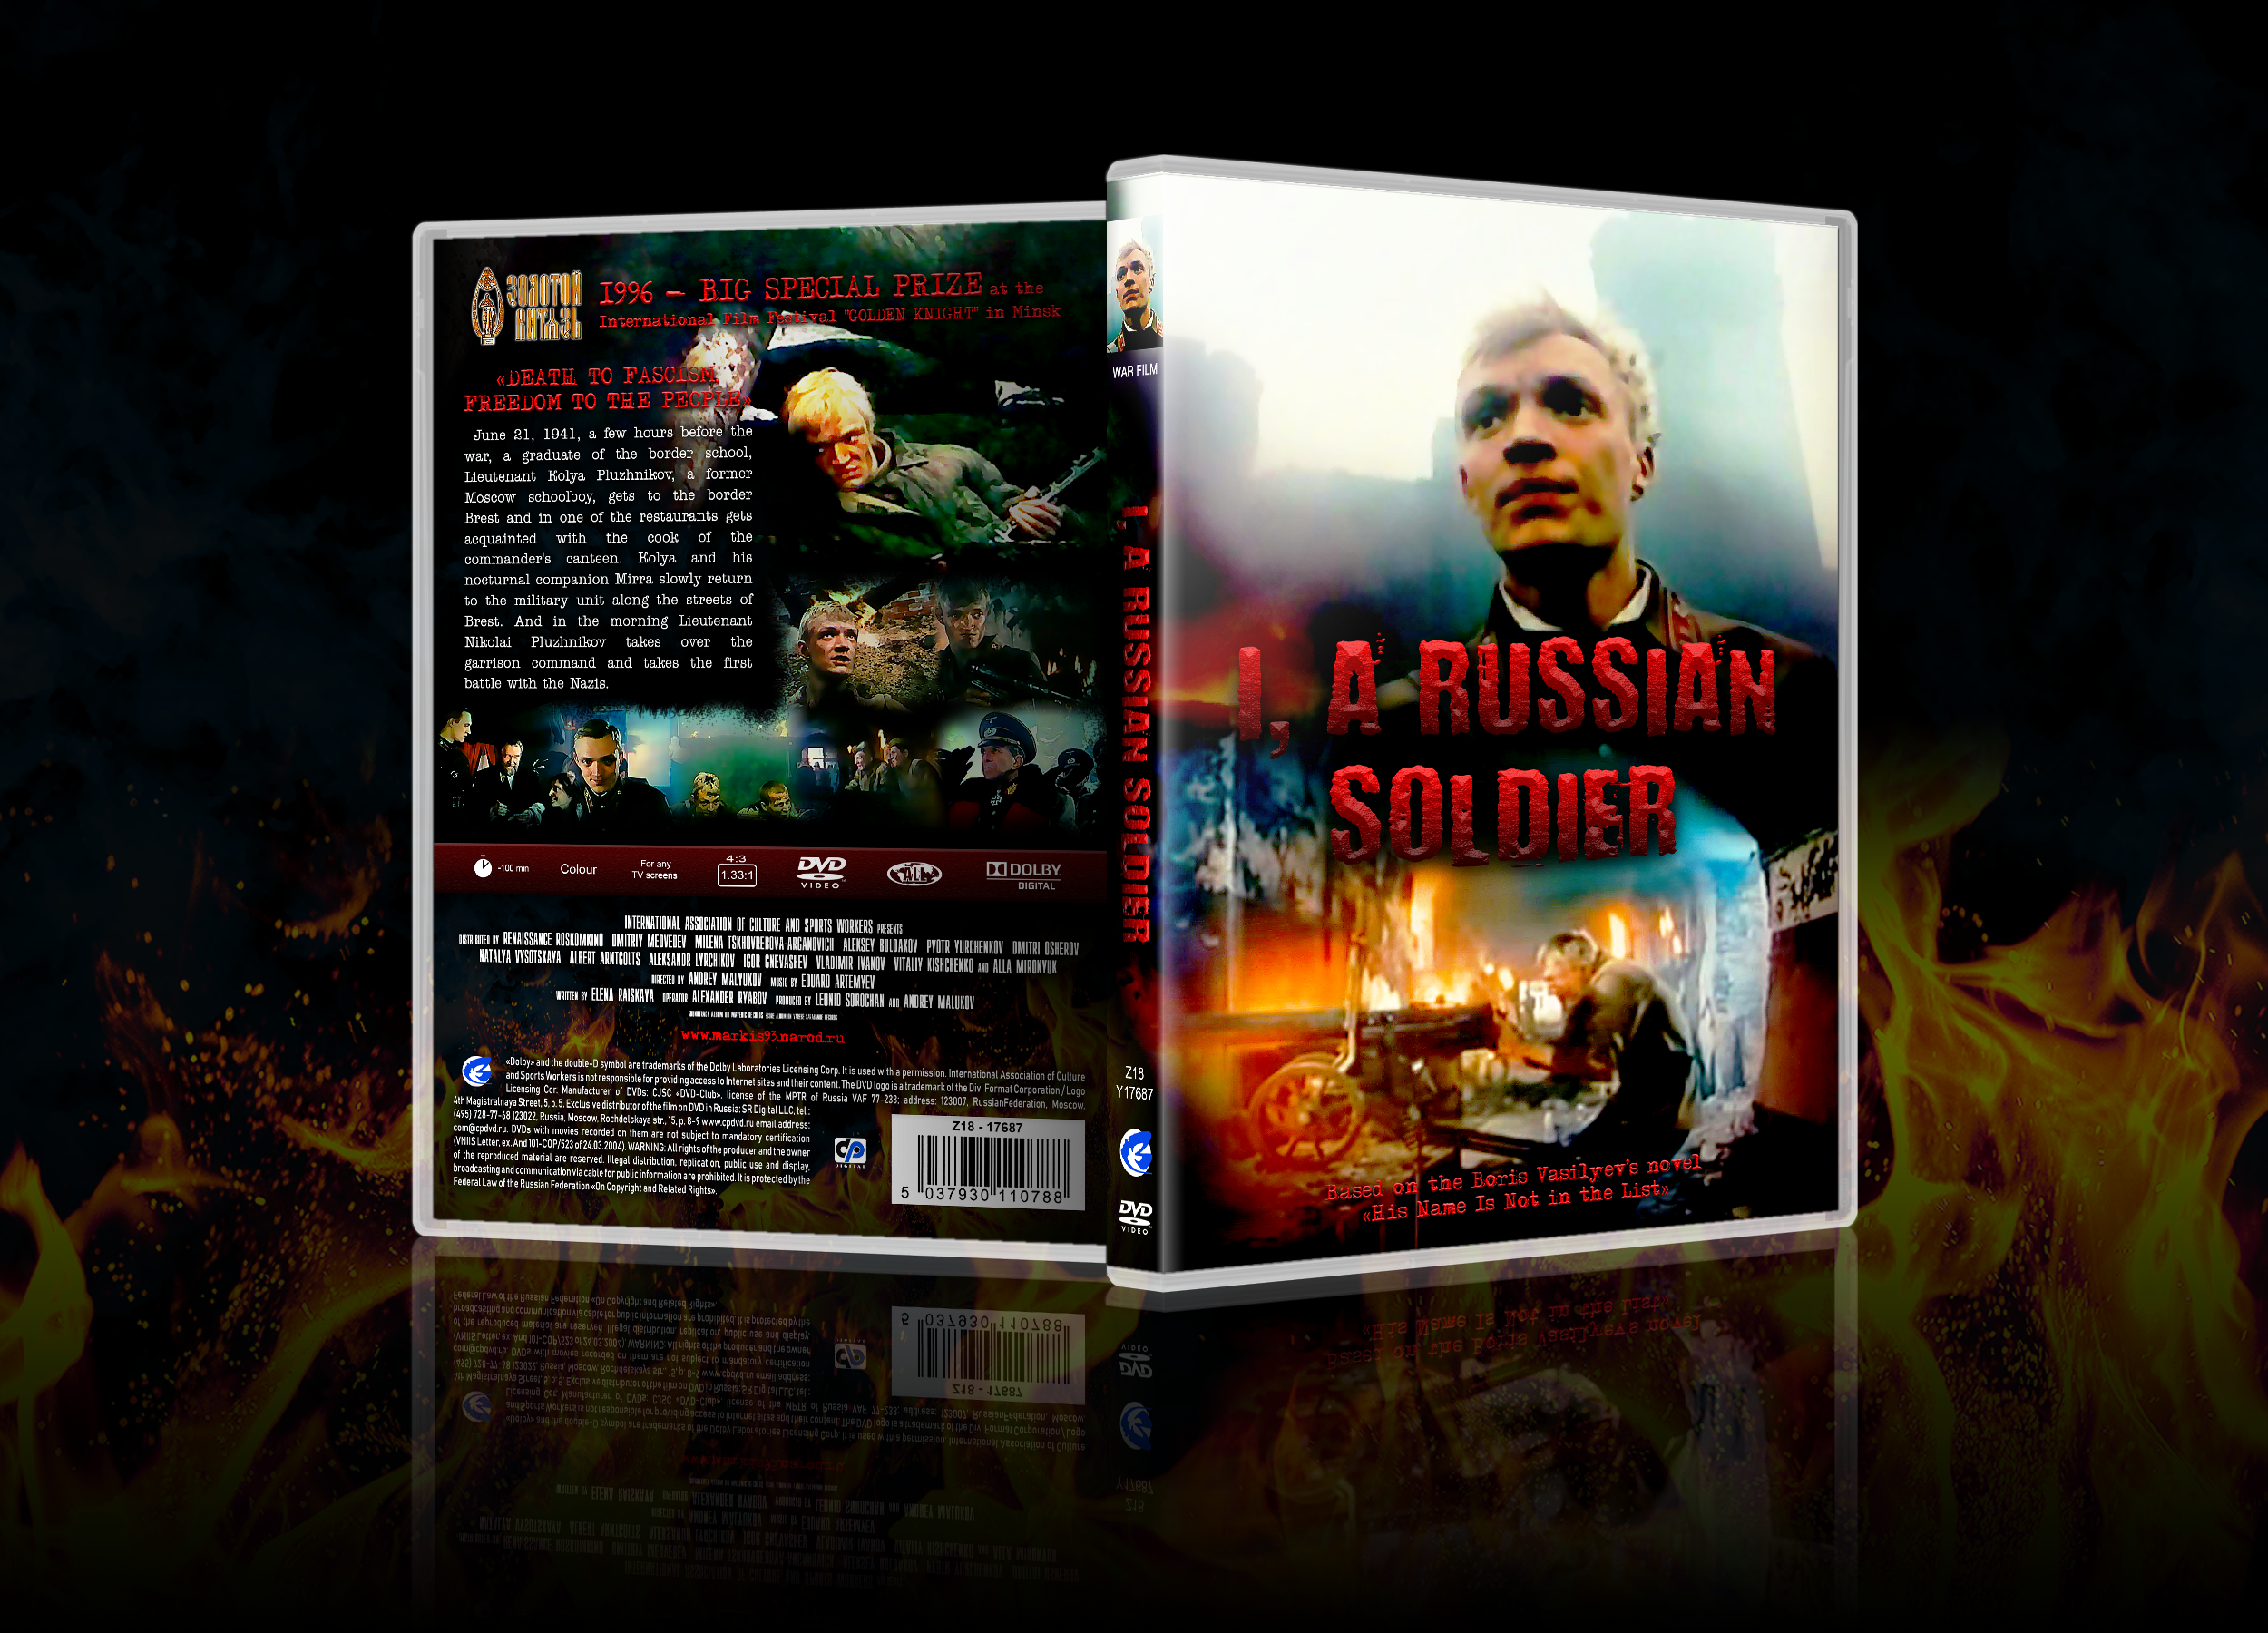 I, a Russian Soldier box cover